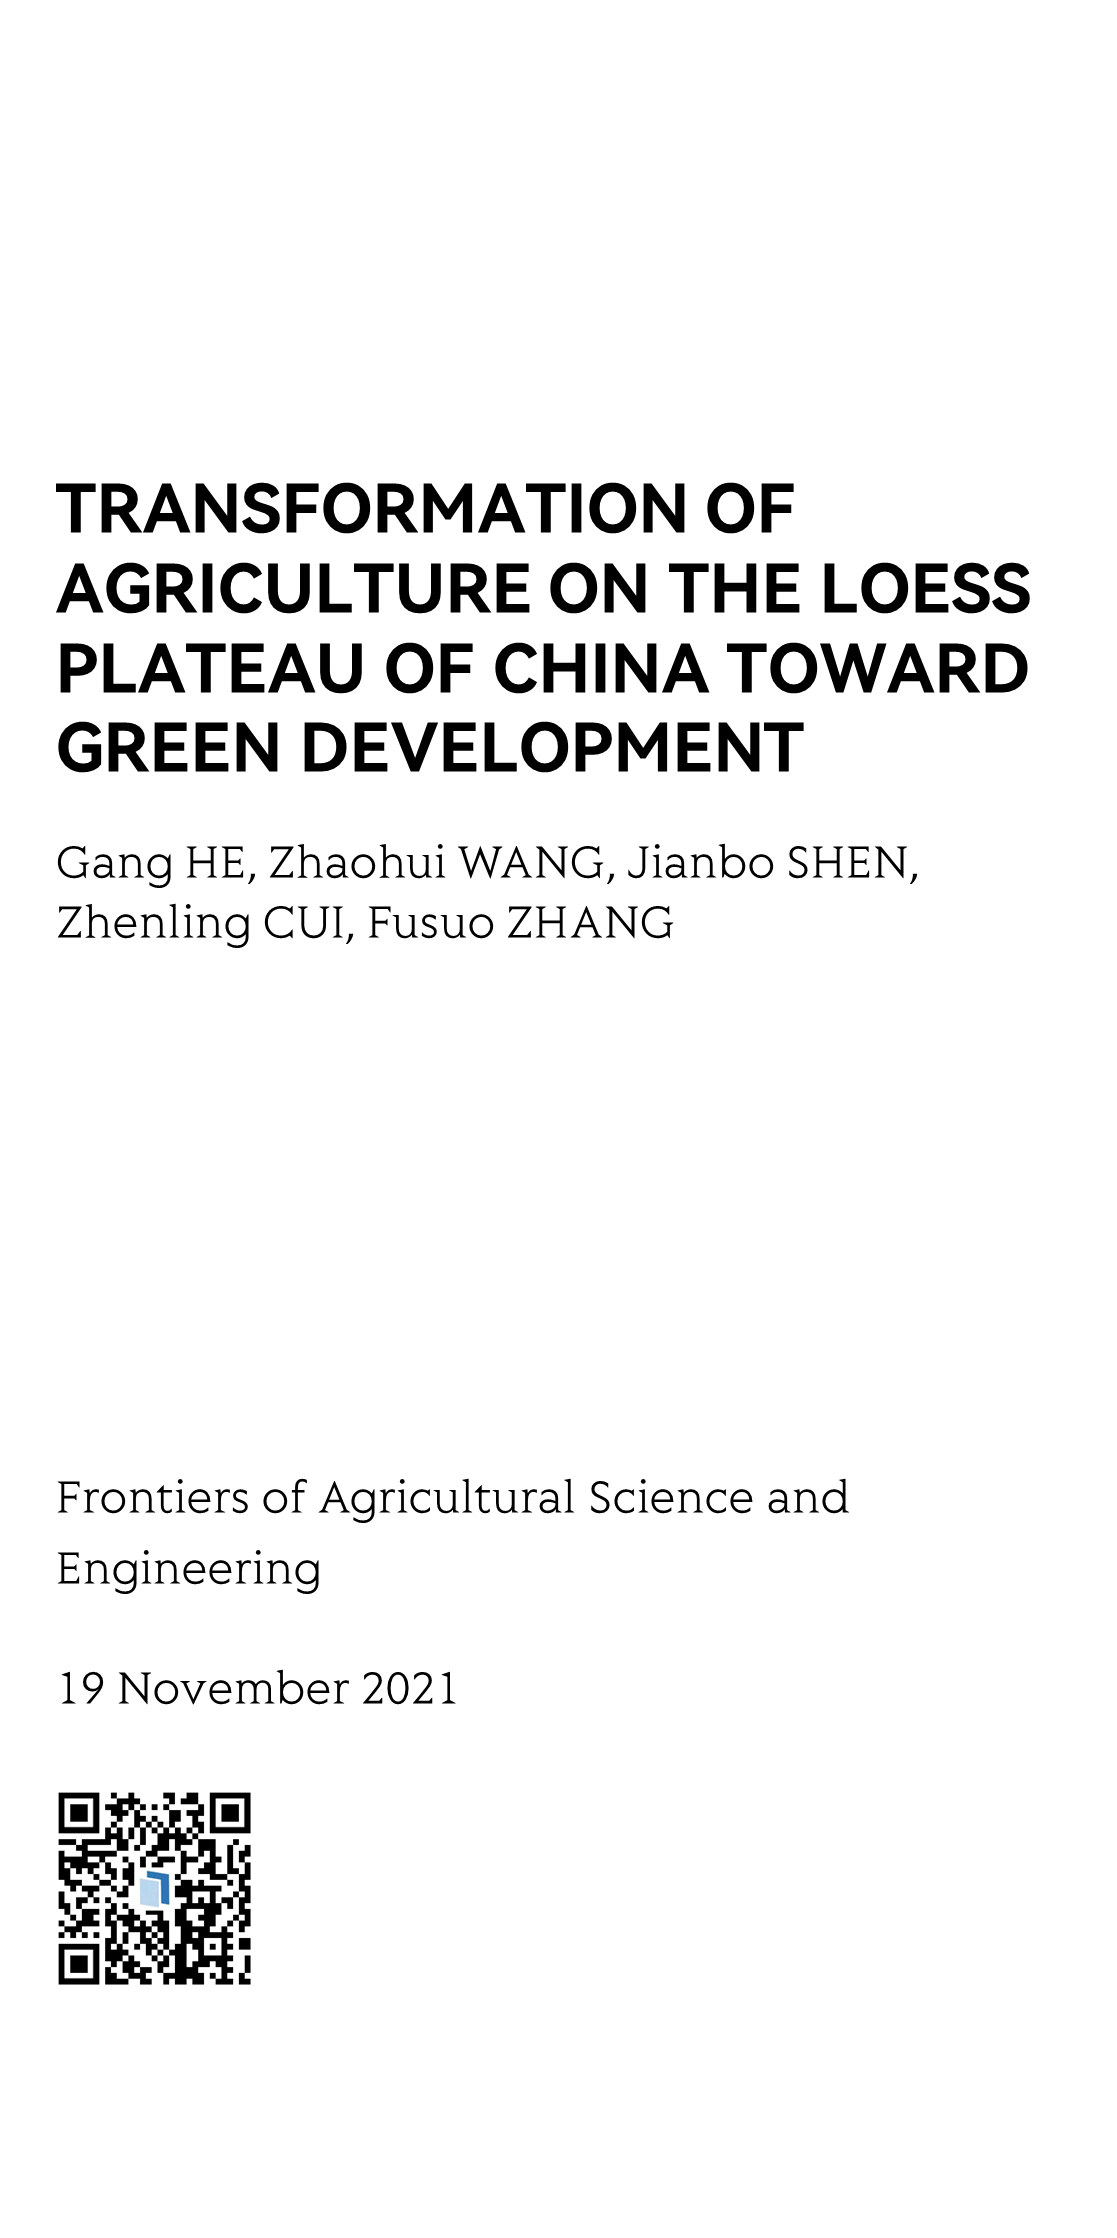 Frontiers of Agricultural Science and Engineering_1